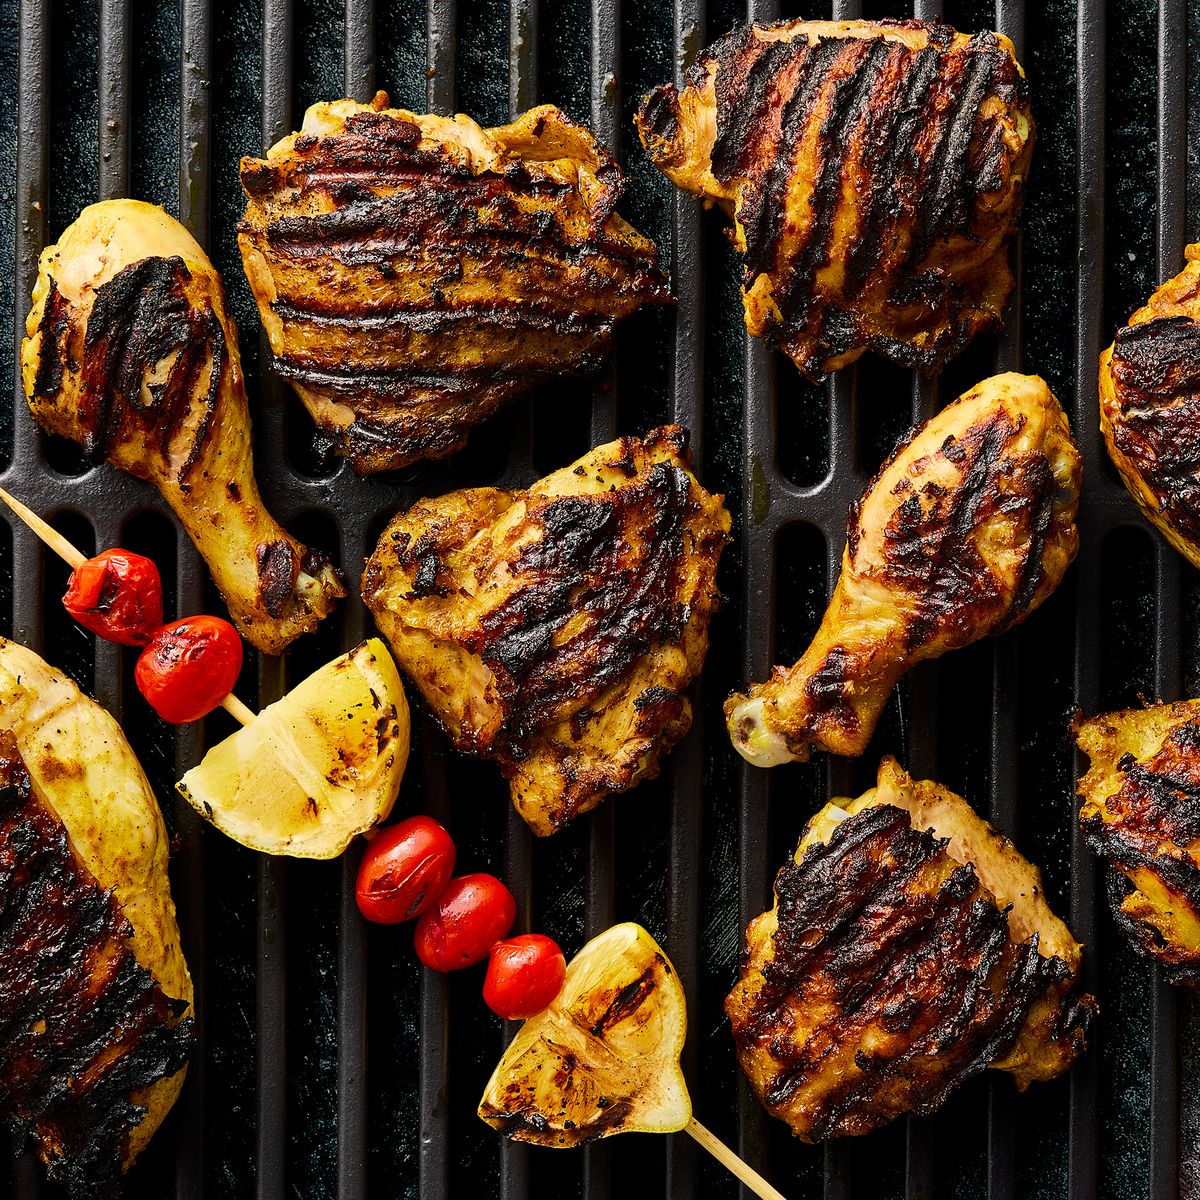 our yogurt-marinated grilled persian chicken is full of bright flavor & texture